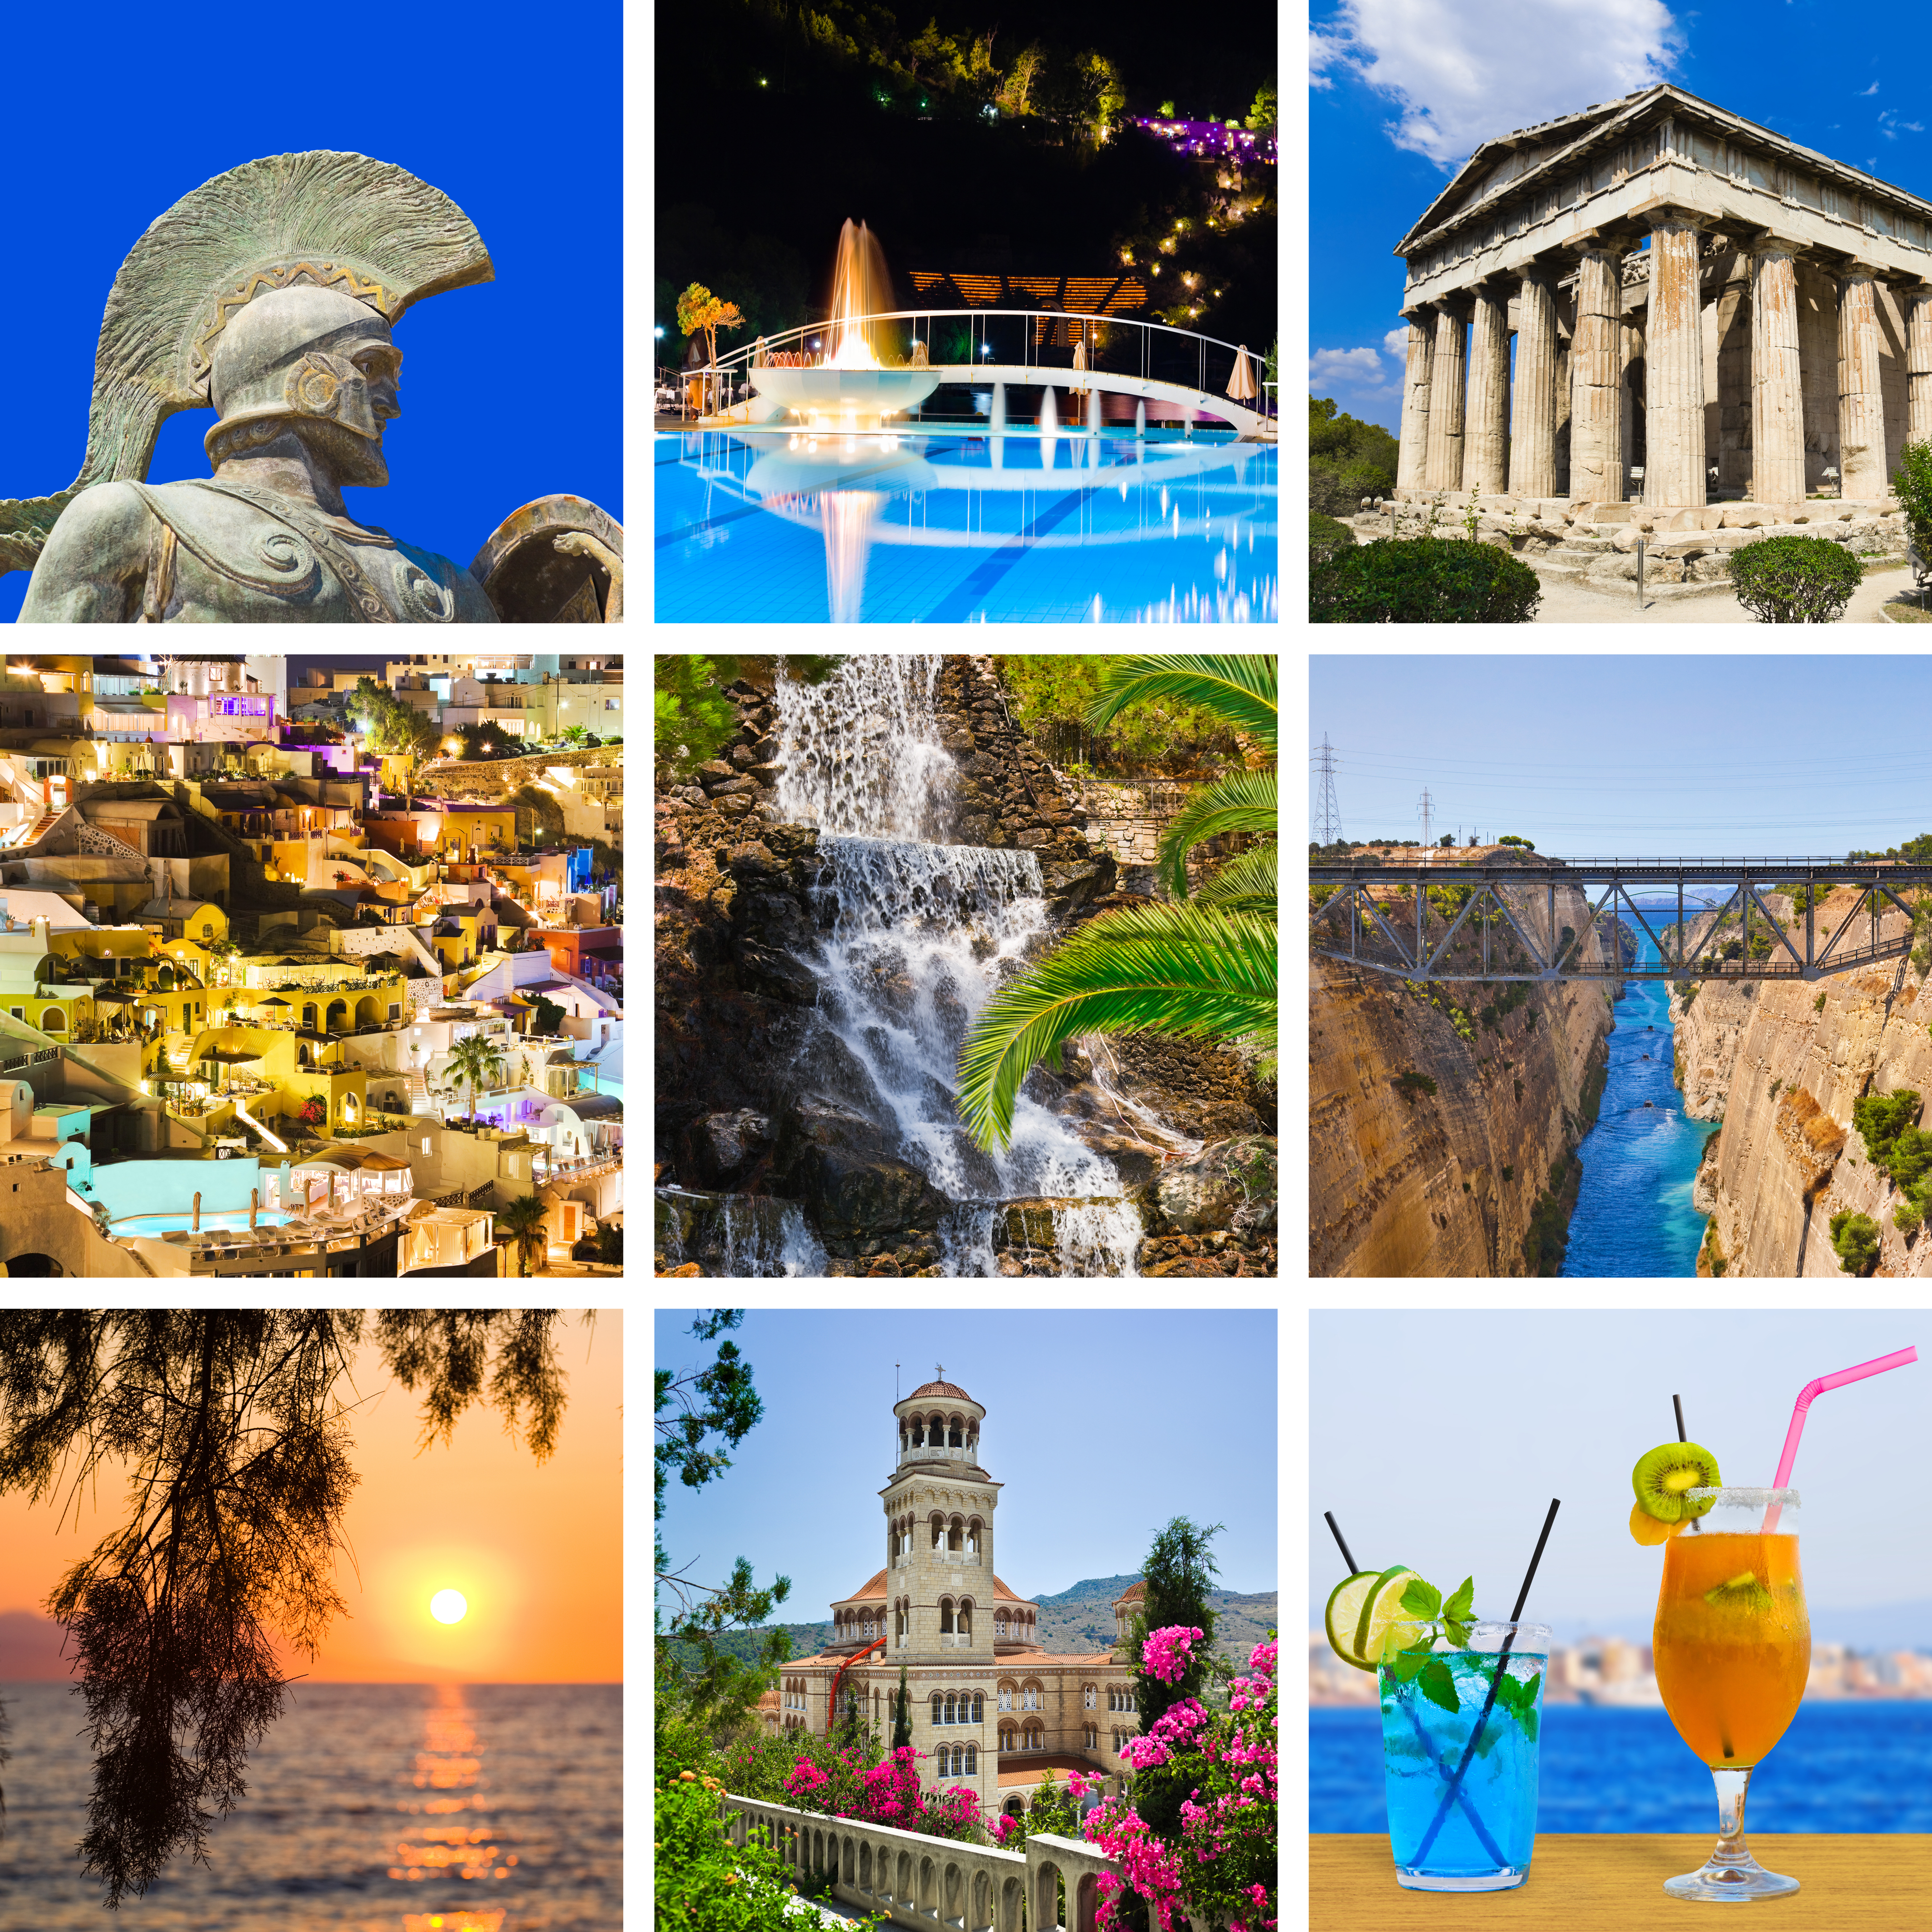 Collage of Greece travel images - nature and tourism background (my photos)